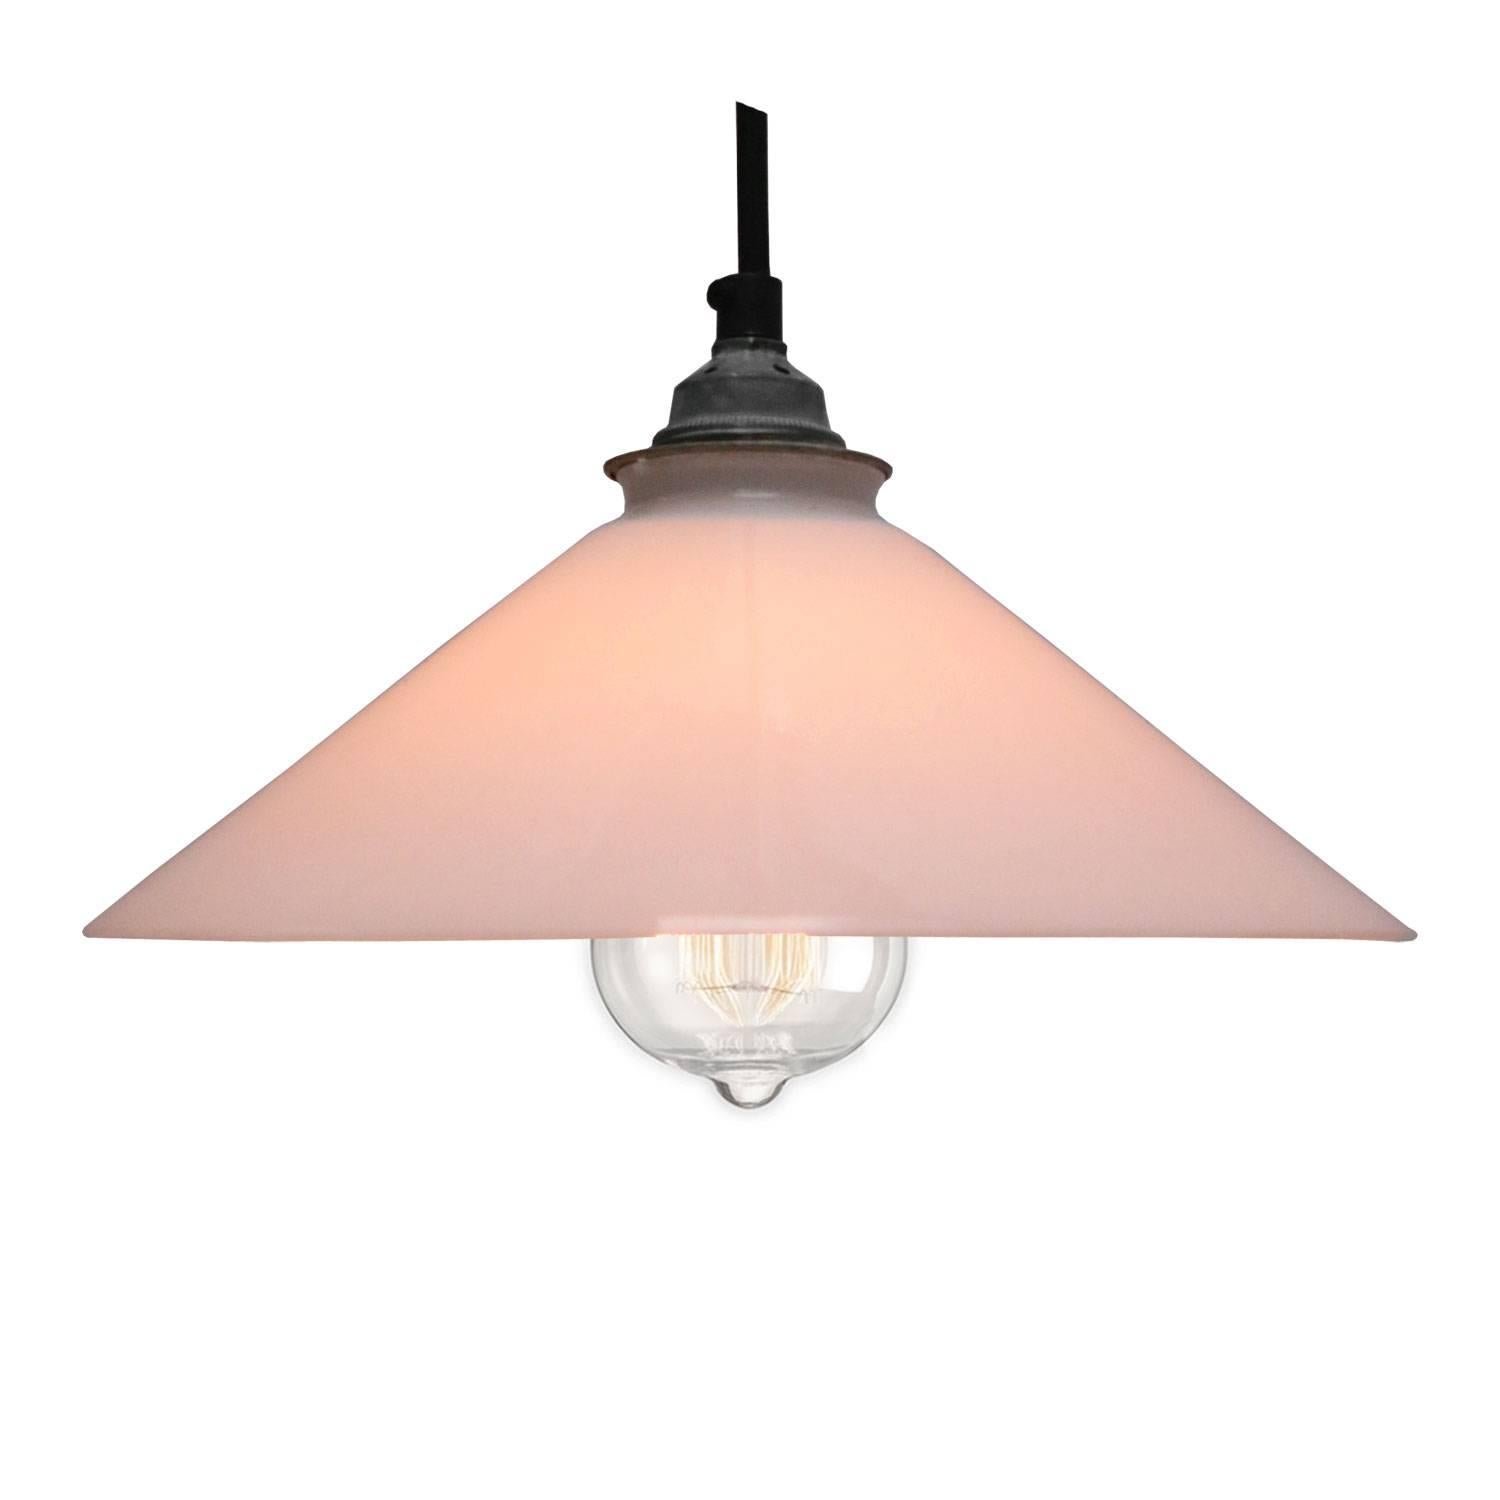 French opaline glass Industrial pendant. Excluding light bulb.

Measure: Weight 1.0 kg / 2.2 lb

All lamps have been made suitable by international standards for incandescent light bulbs, energy-efficient and LED bulbs. E26/E27 bulb holders and